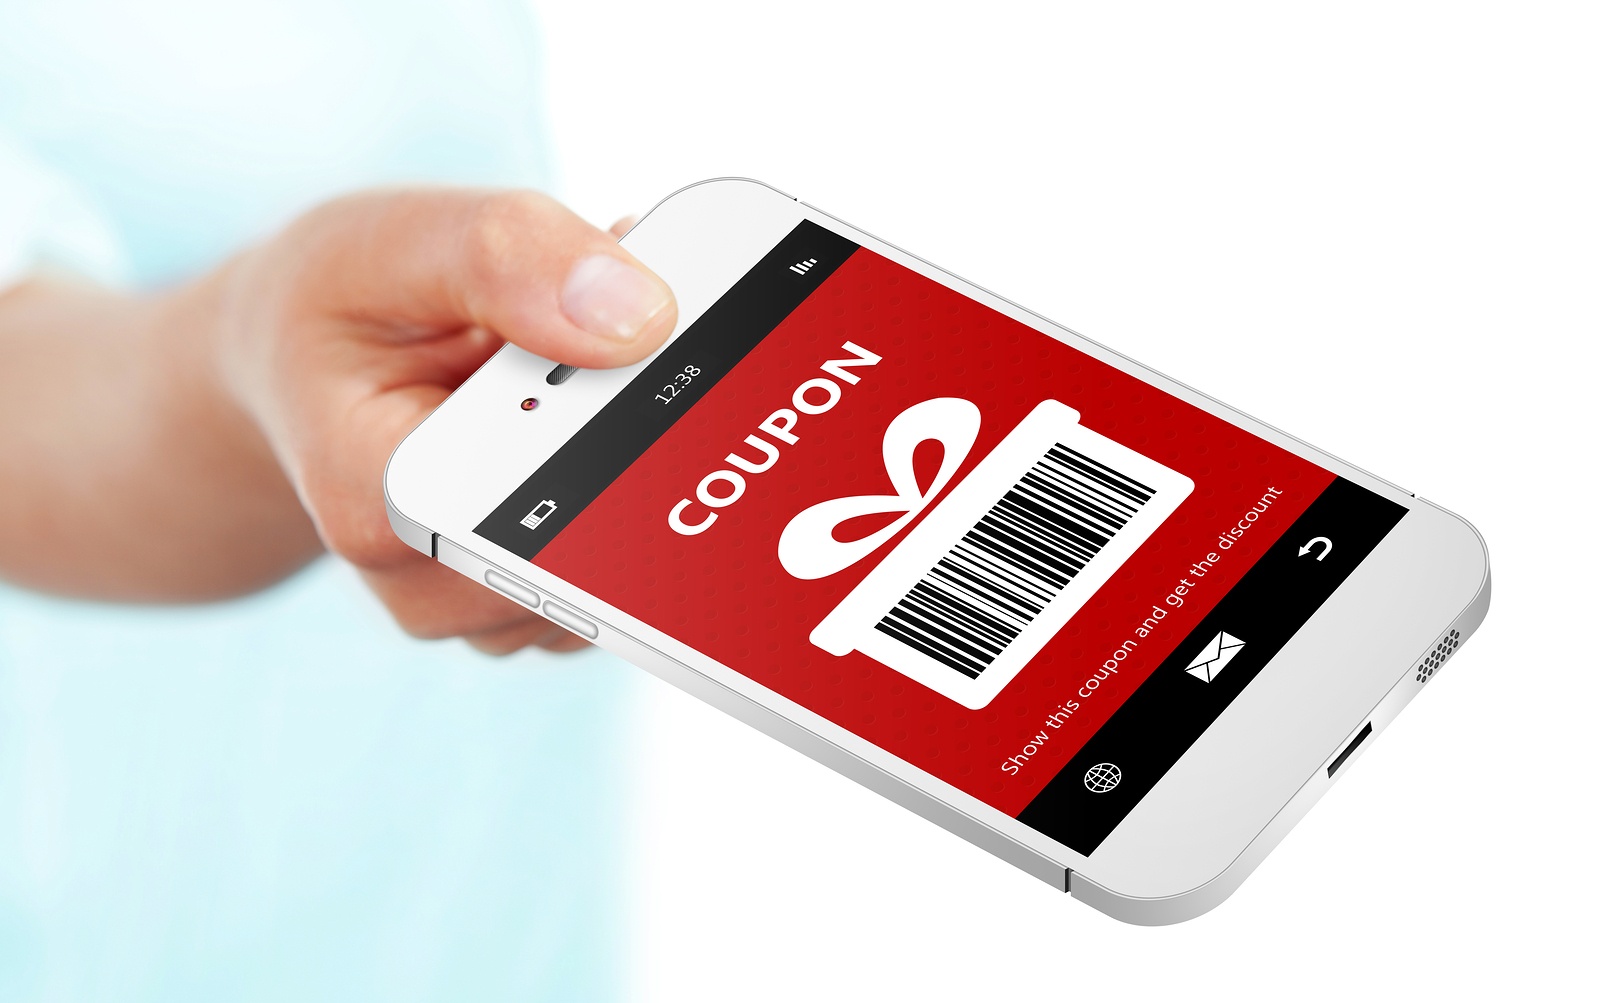 Mobile Coupons High Priority For Brands/Consumers But Not Small Businesses